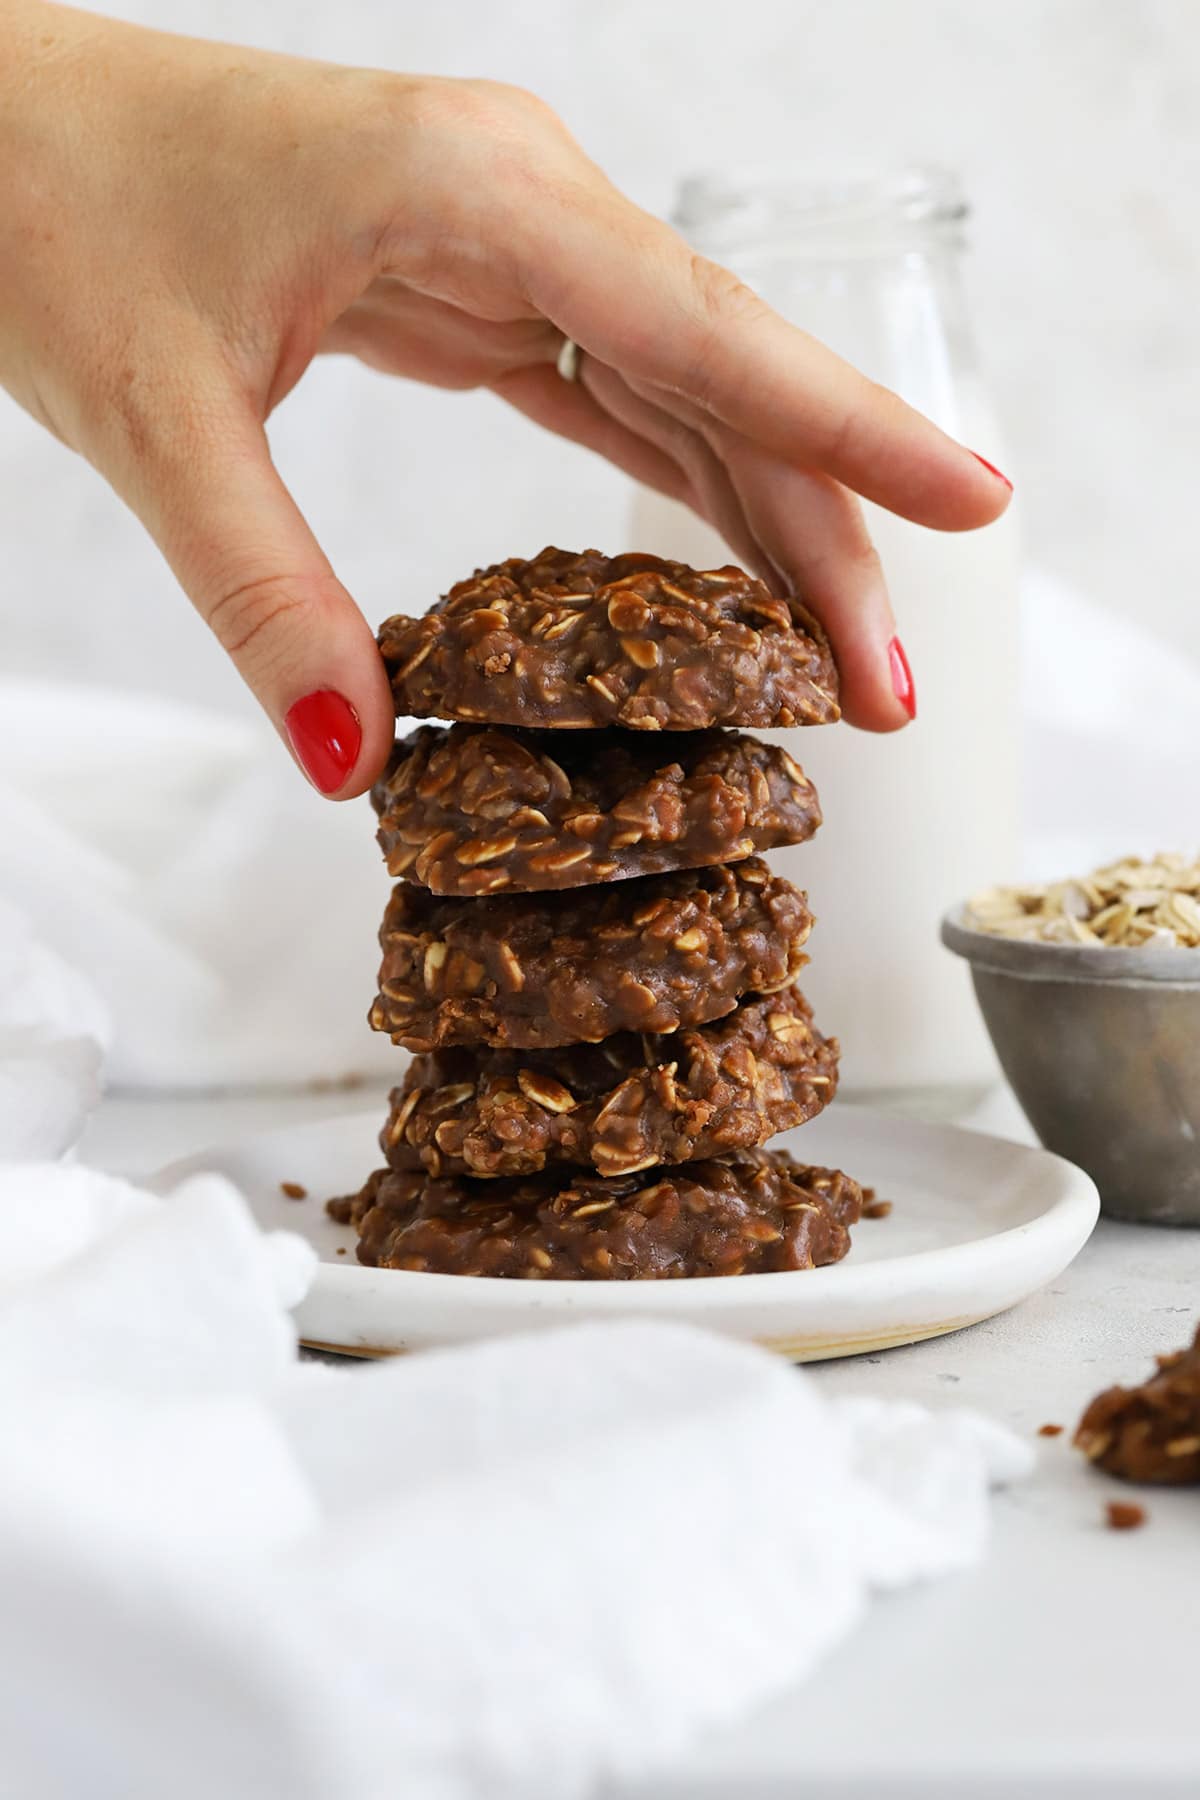 A stack of five gluten-free no-bake cookies on a white plate with a bottle of milk in the background